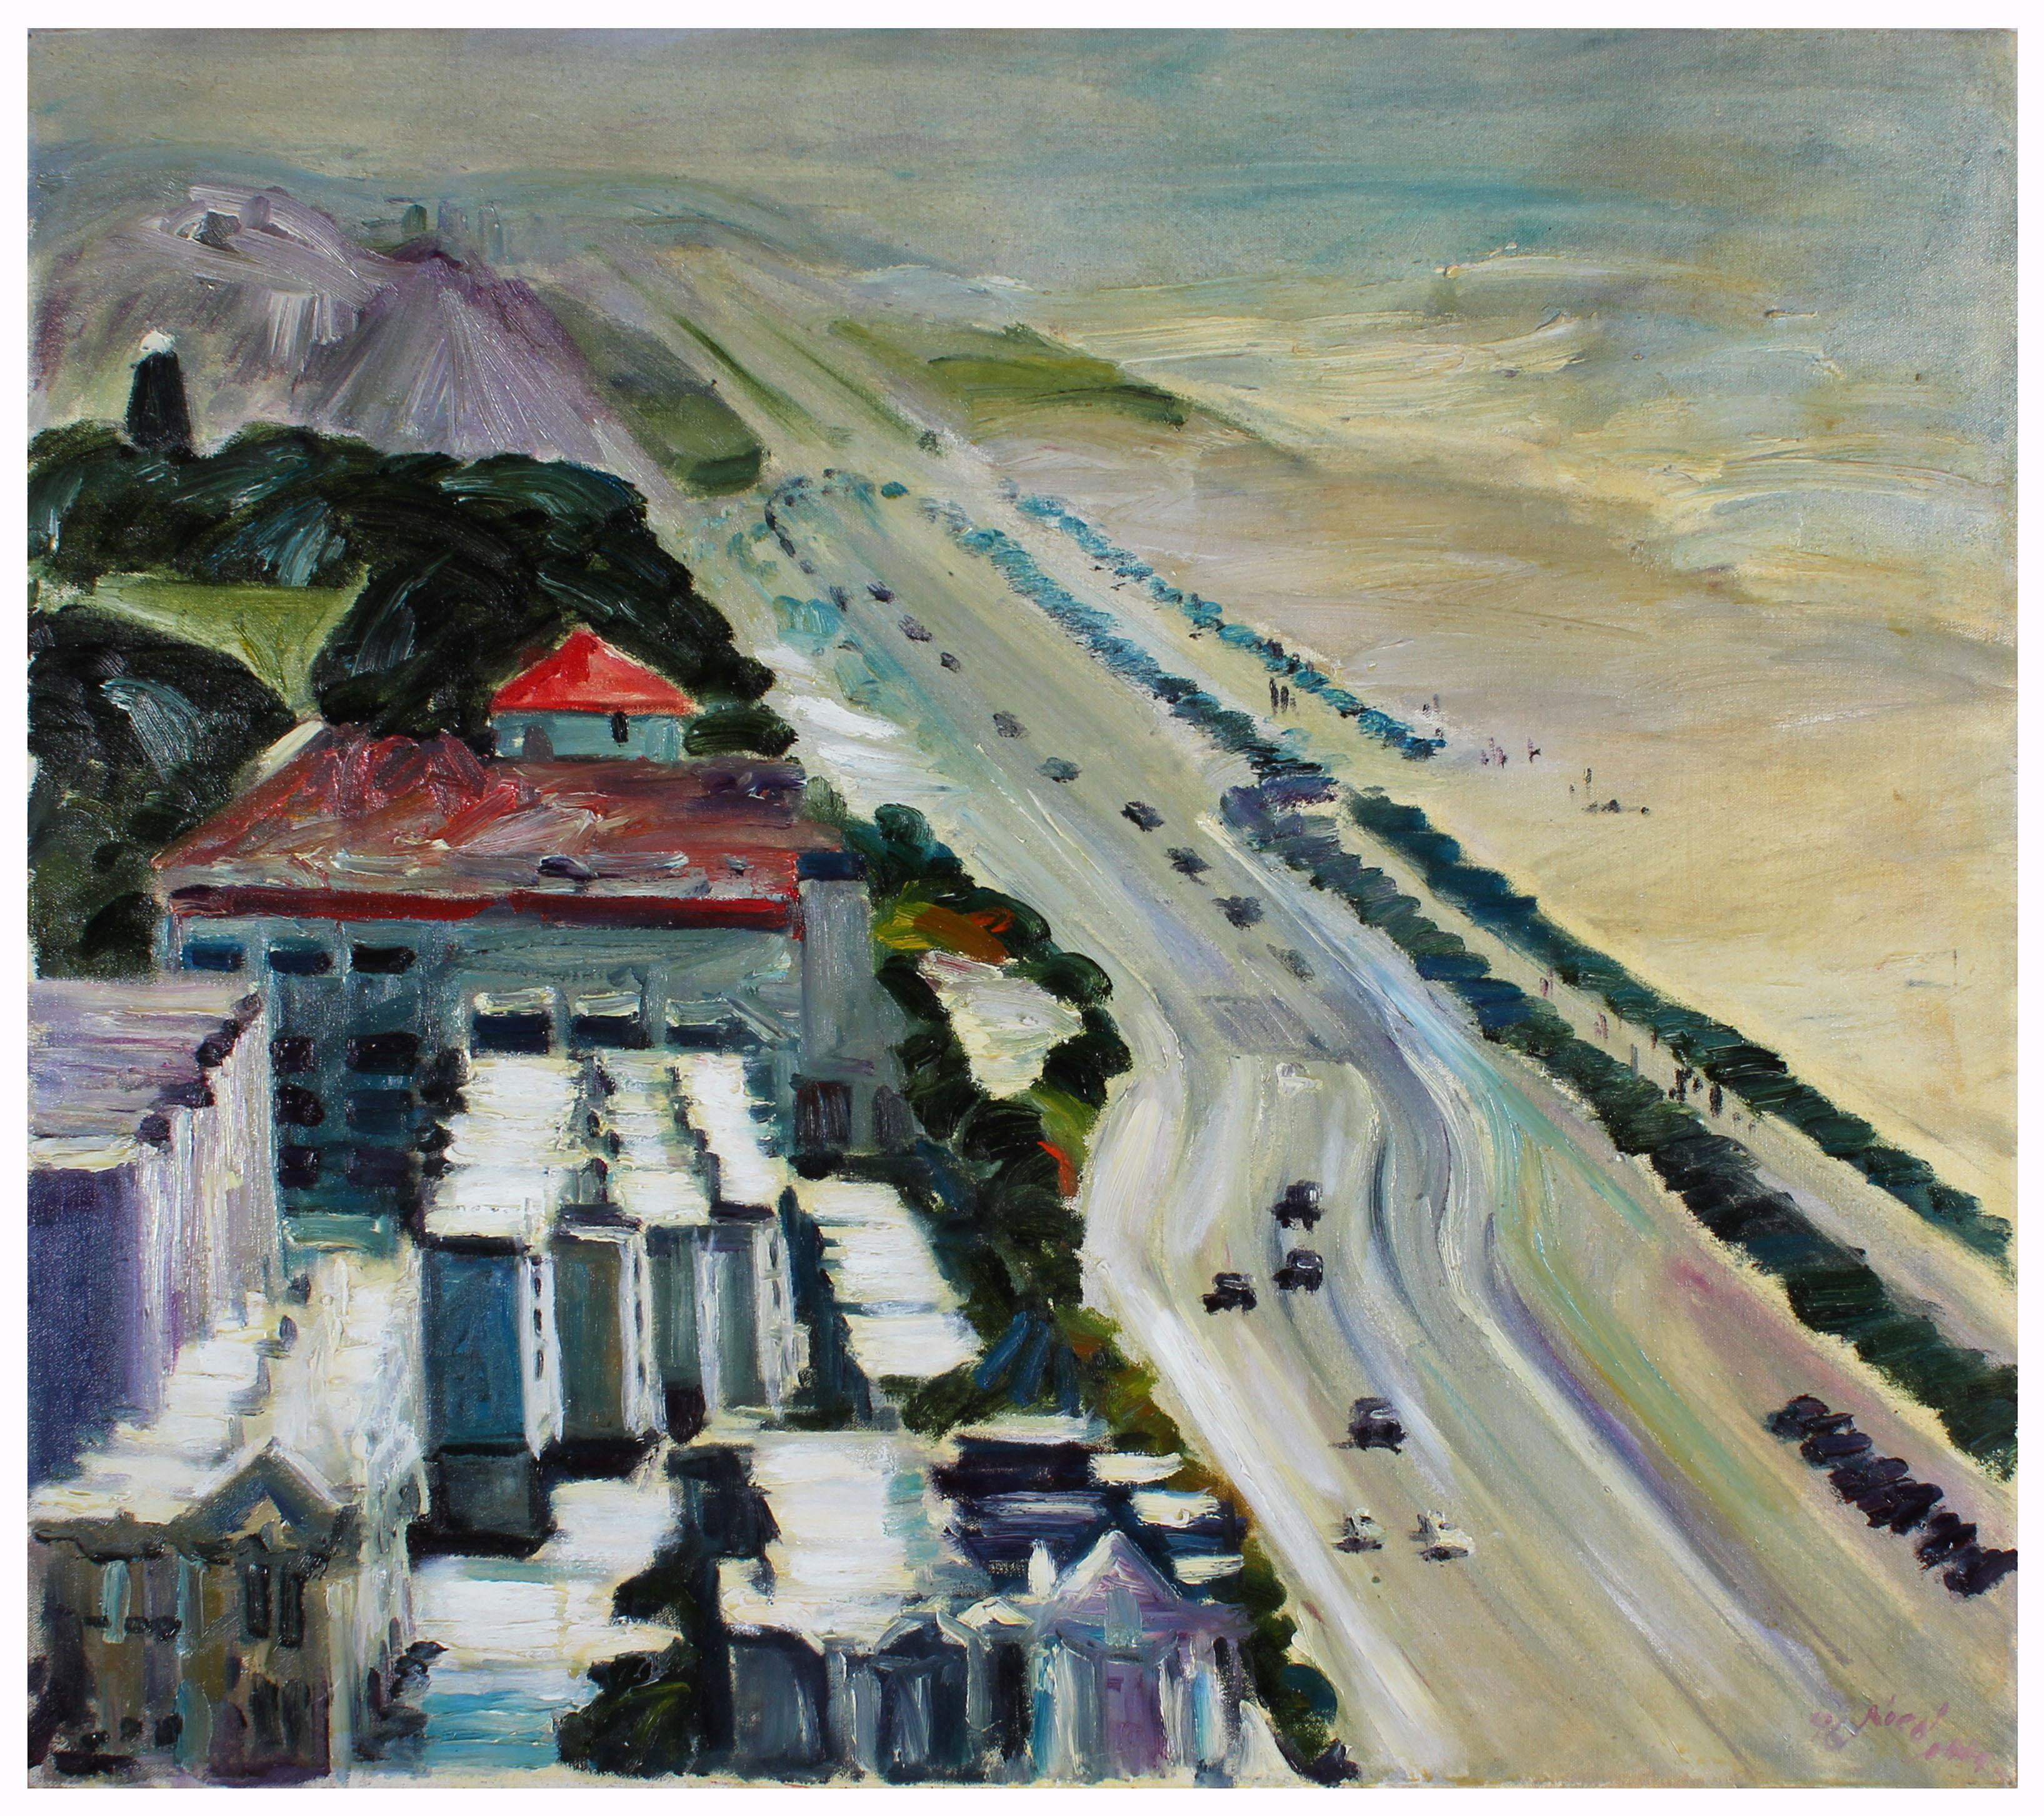 This 1996 Bay Area cityscape/ seascape in oil on stretched canvas is by Bay Area artist John Nicolini (1923-2014). Nicolini was born in 1923 in San Francisco and attended Fremont High School in Oakland. Later in life he went on to study at